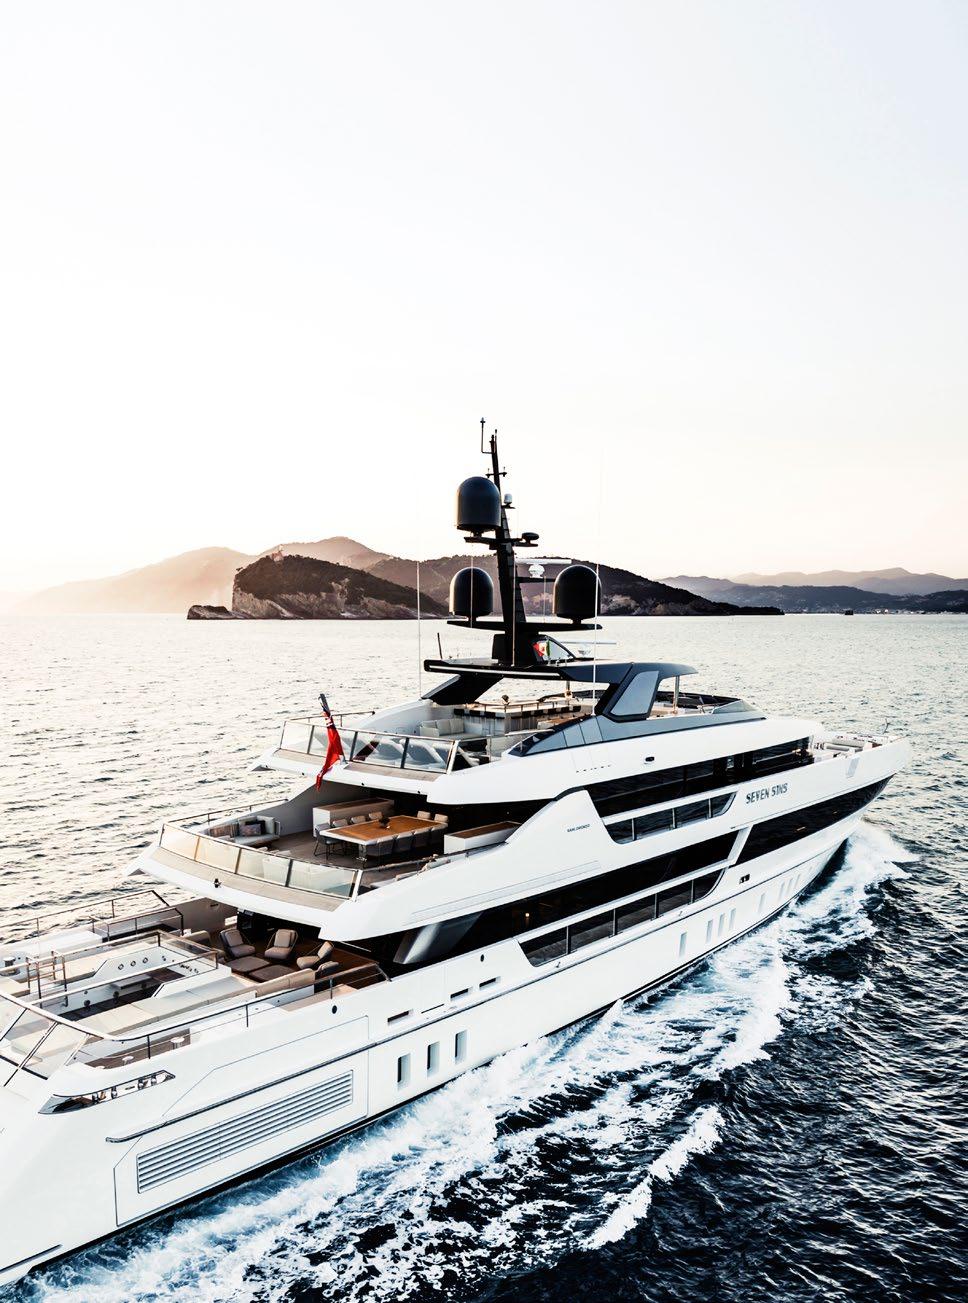 ASIA S AWARD WINNING YACHTING LIFESTYLE MAGAZINE 10th SPECIAL ANNIVERSARY ISSUE THE TOP 100 SUPERYACHTS OF